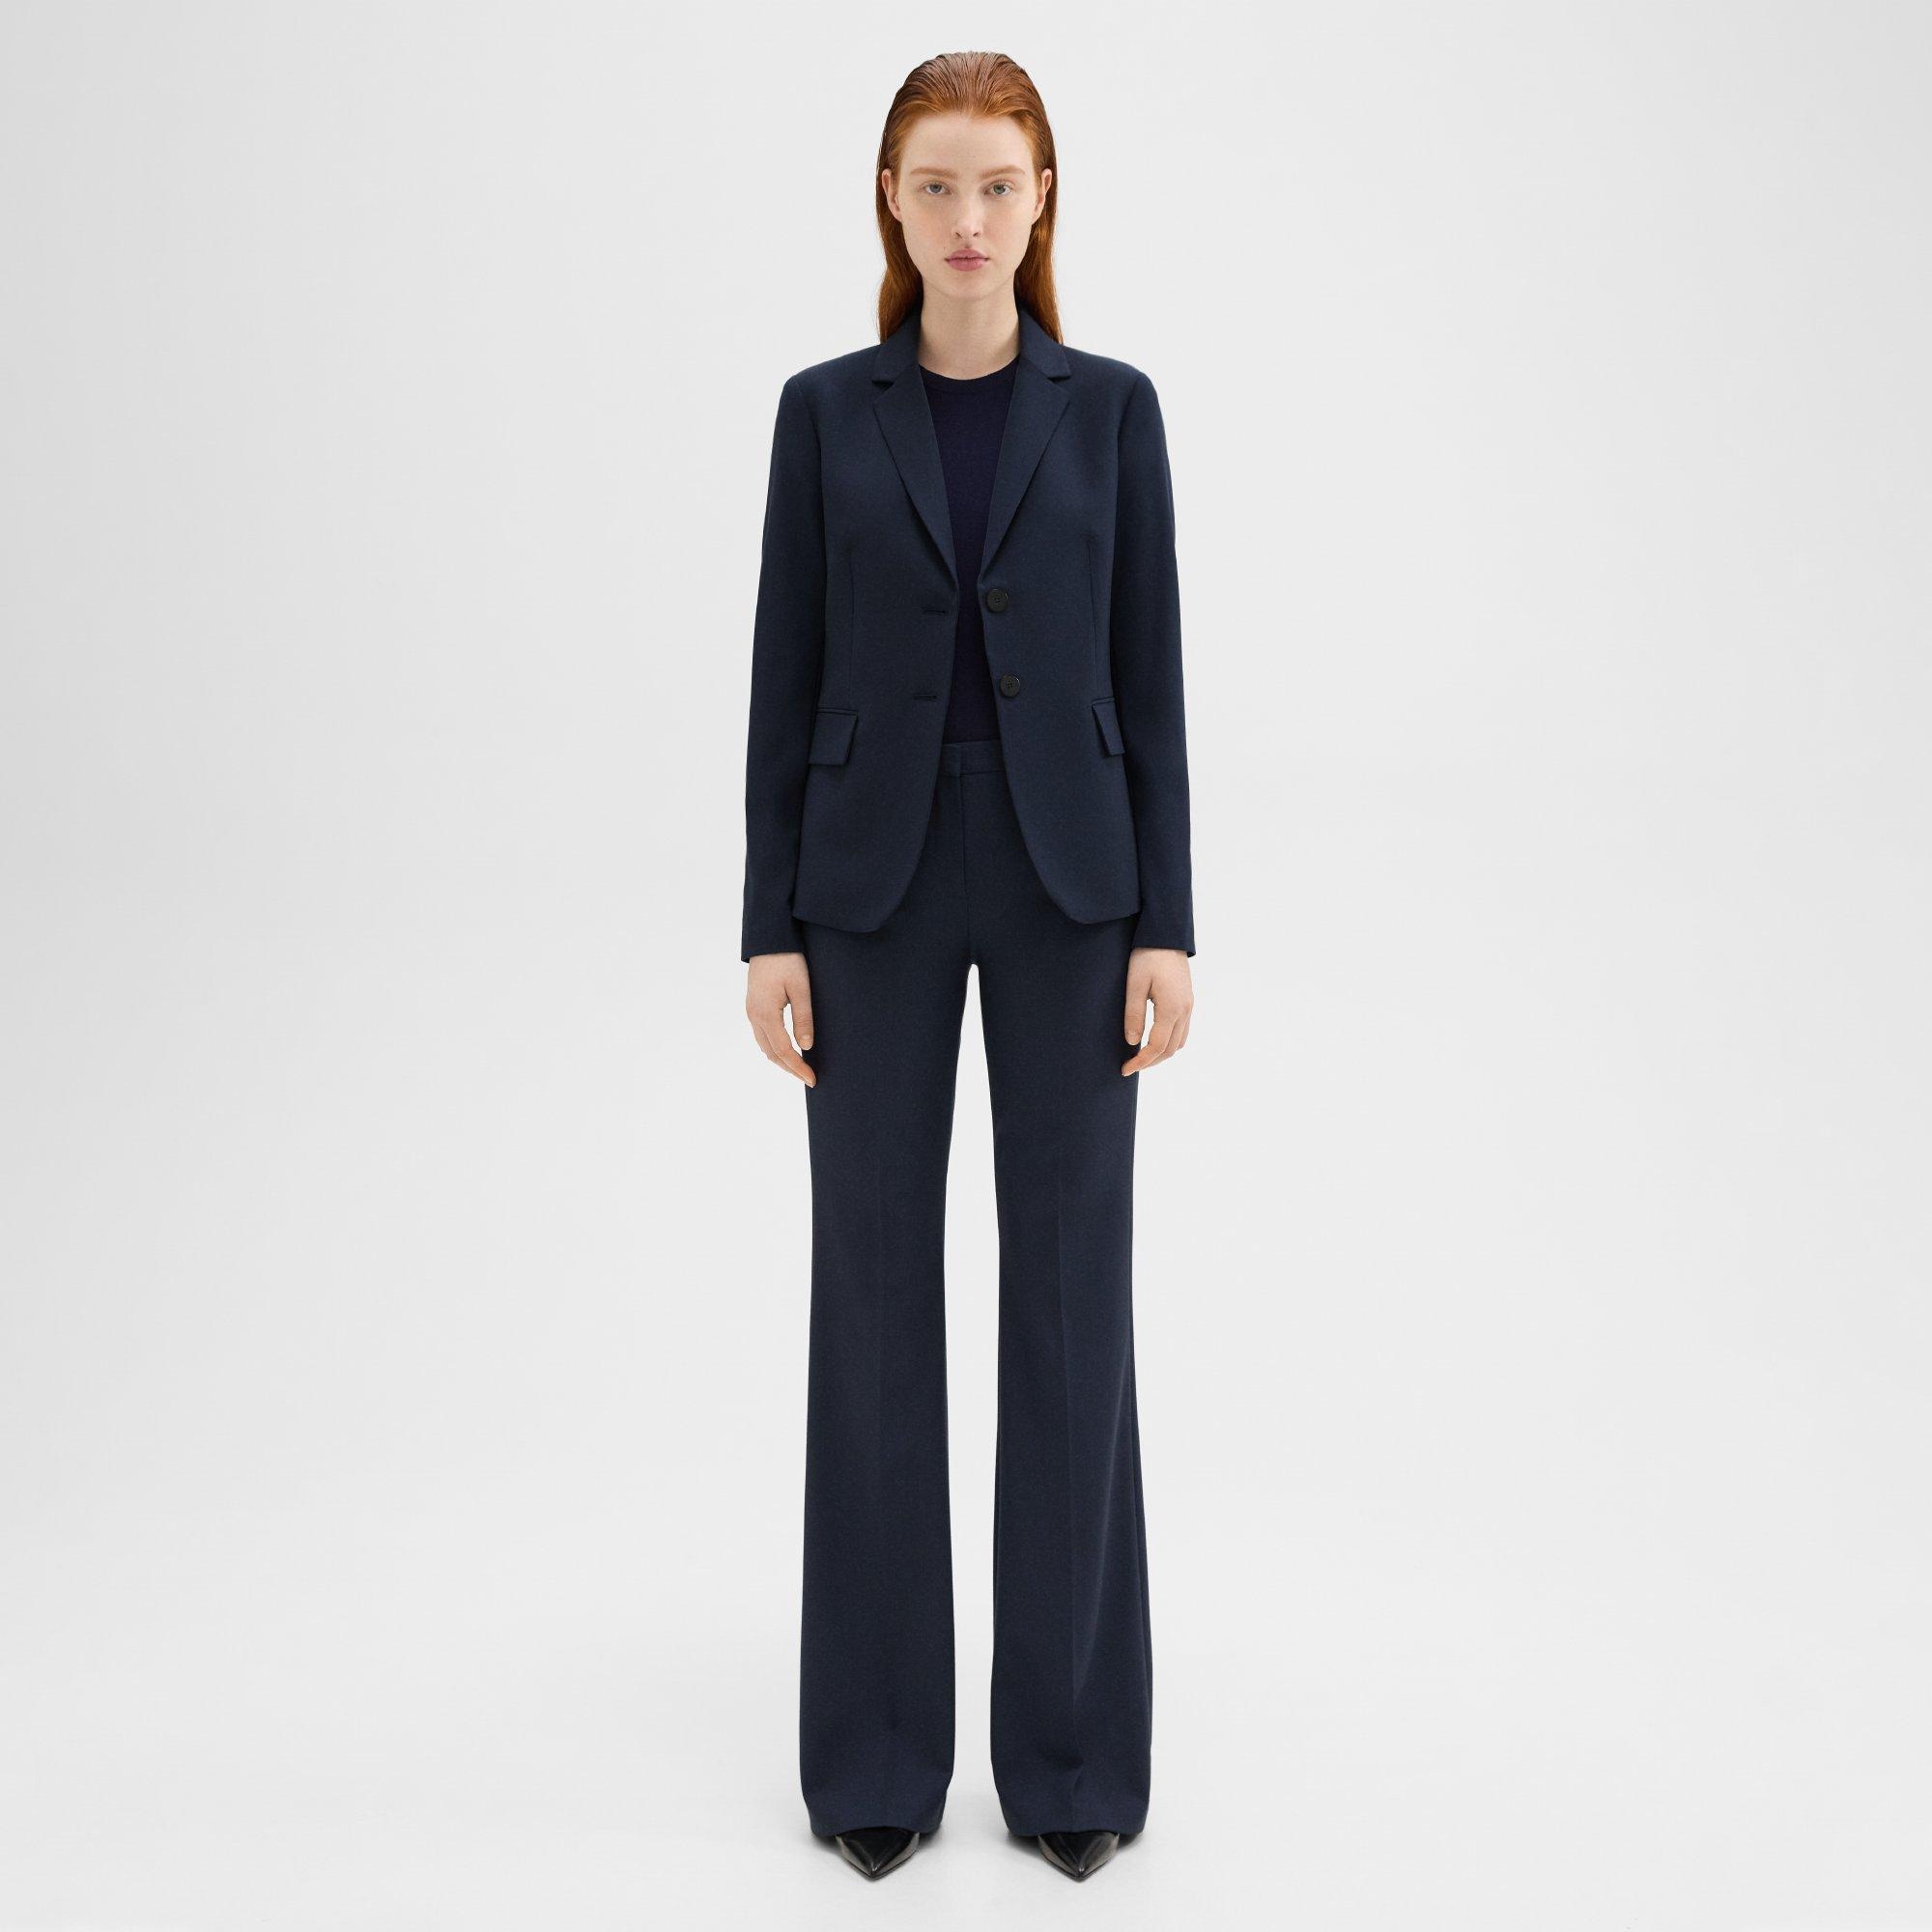 Women's Trousers & Shorts | Theory Official Site